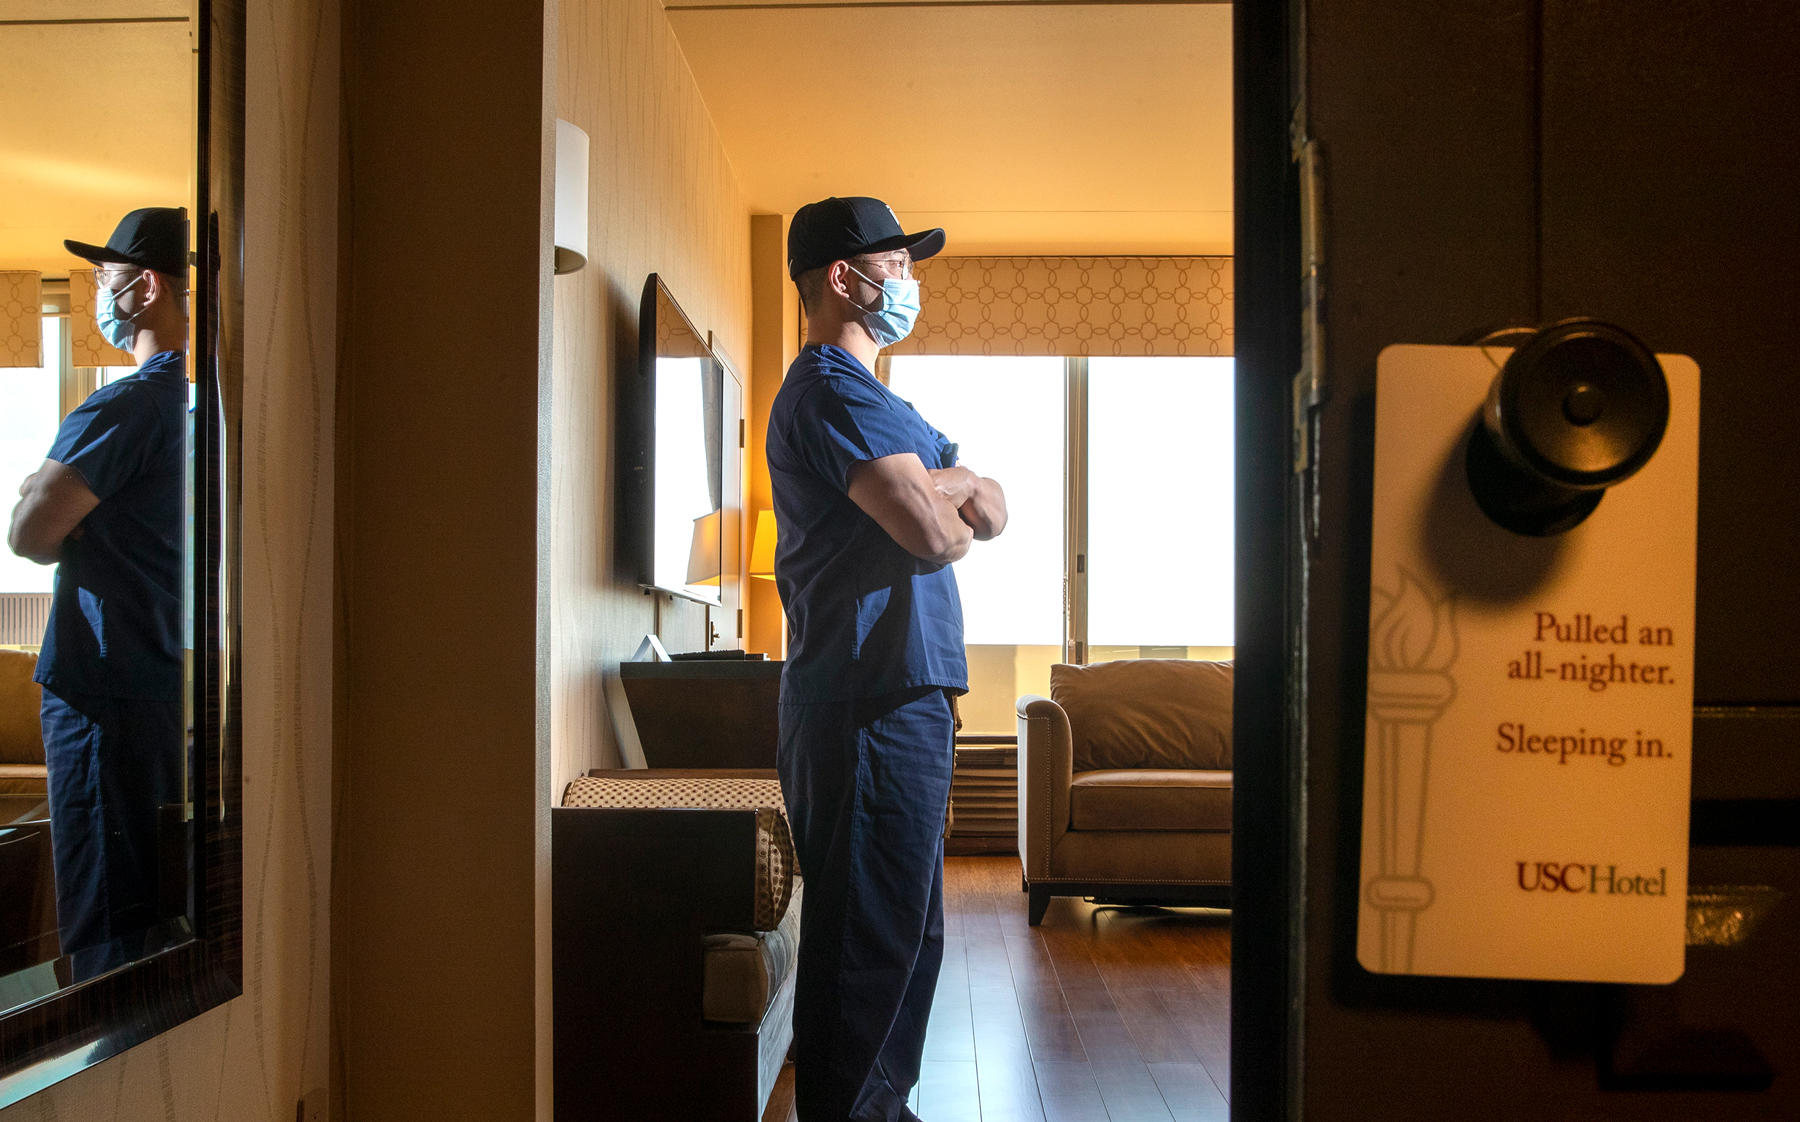 An essential worker staying at USC Hotel in Los Angeles (Credit: Robert Gauthier / Los Angeles Times via Getty Images)